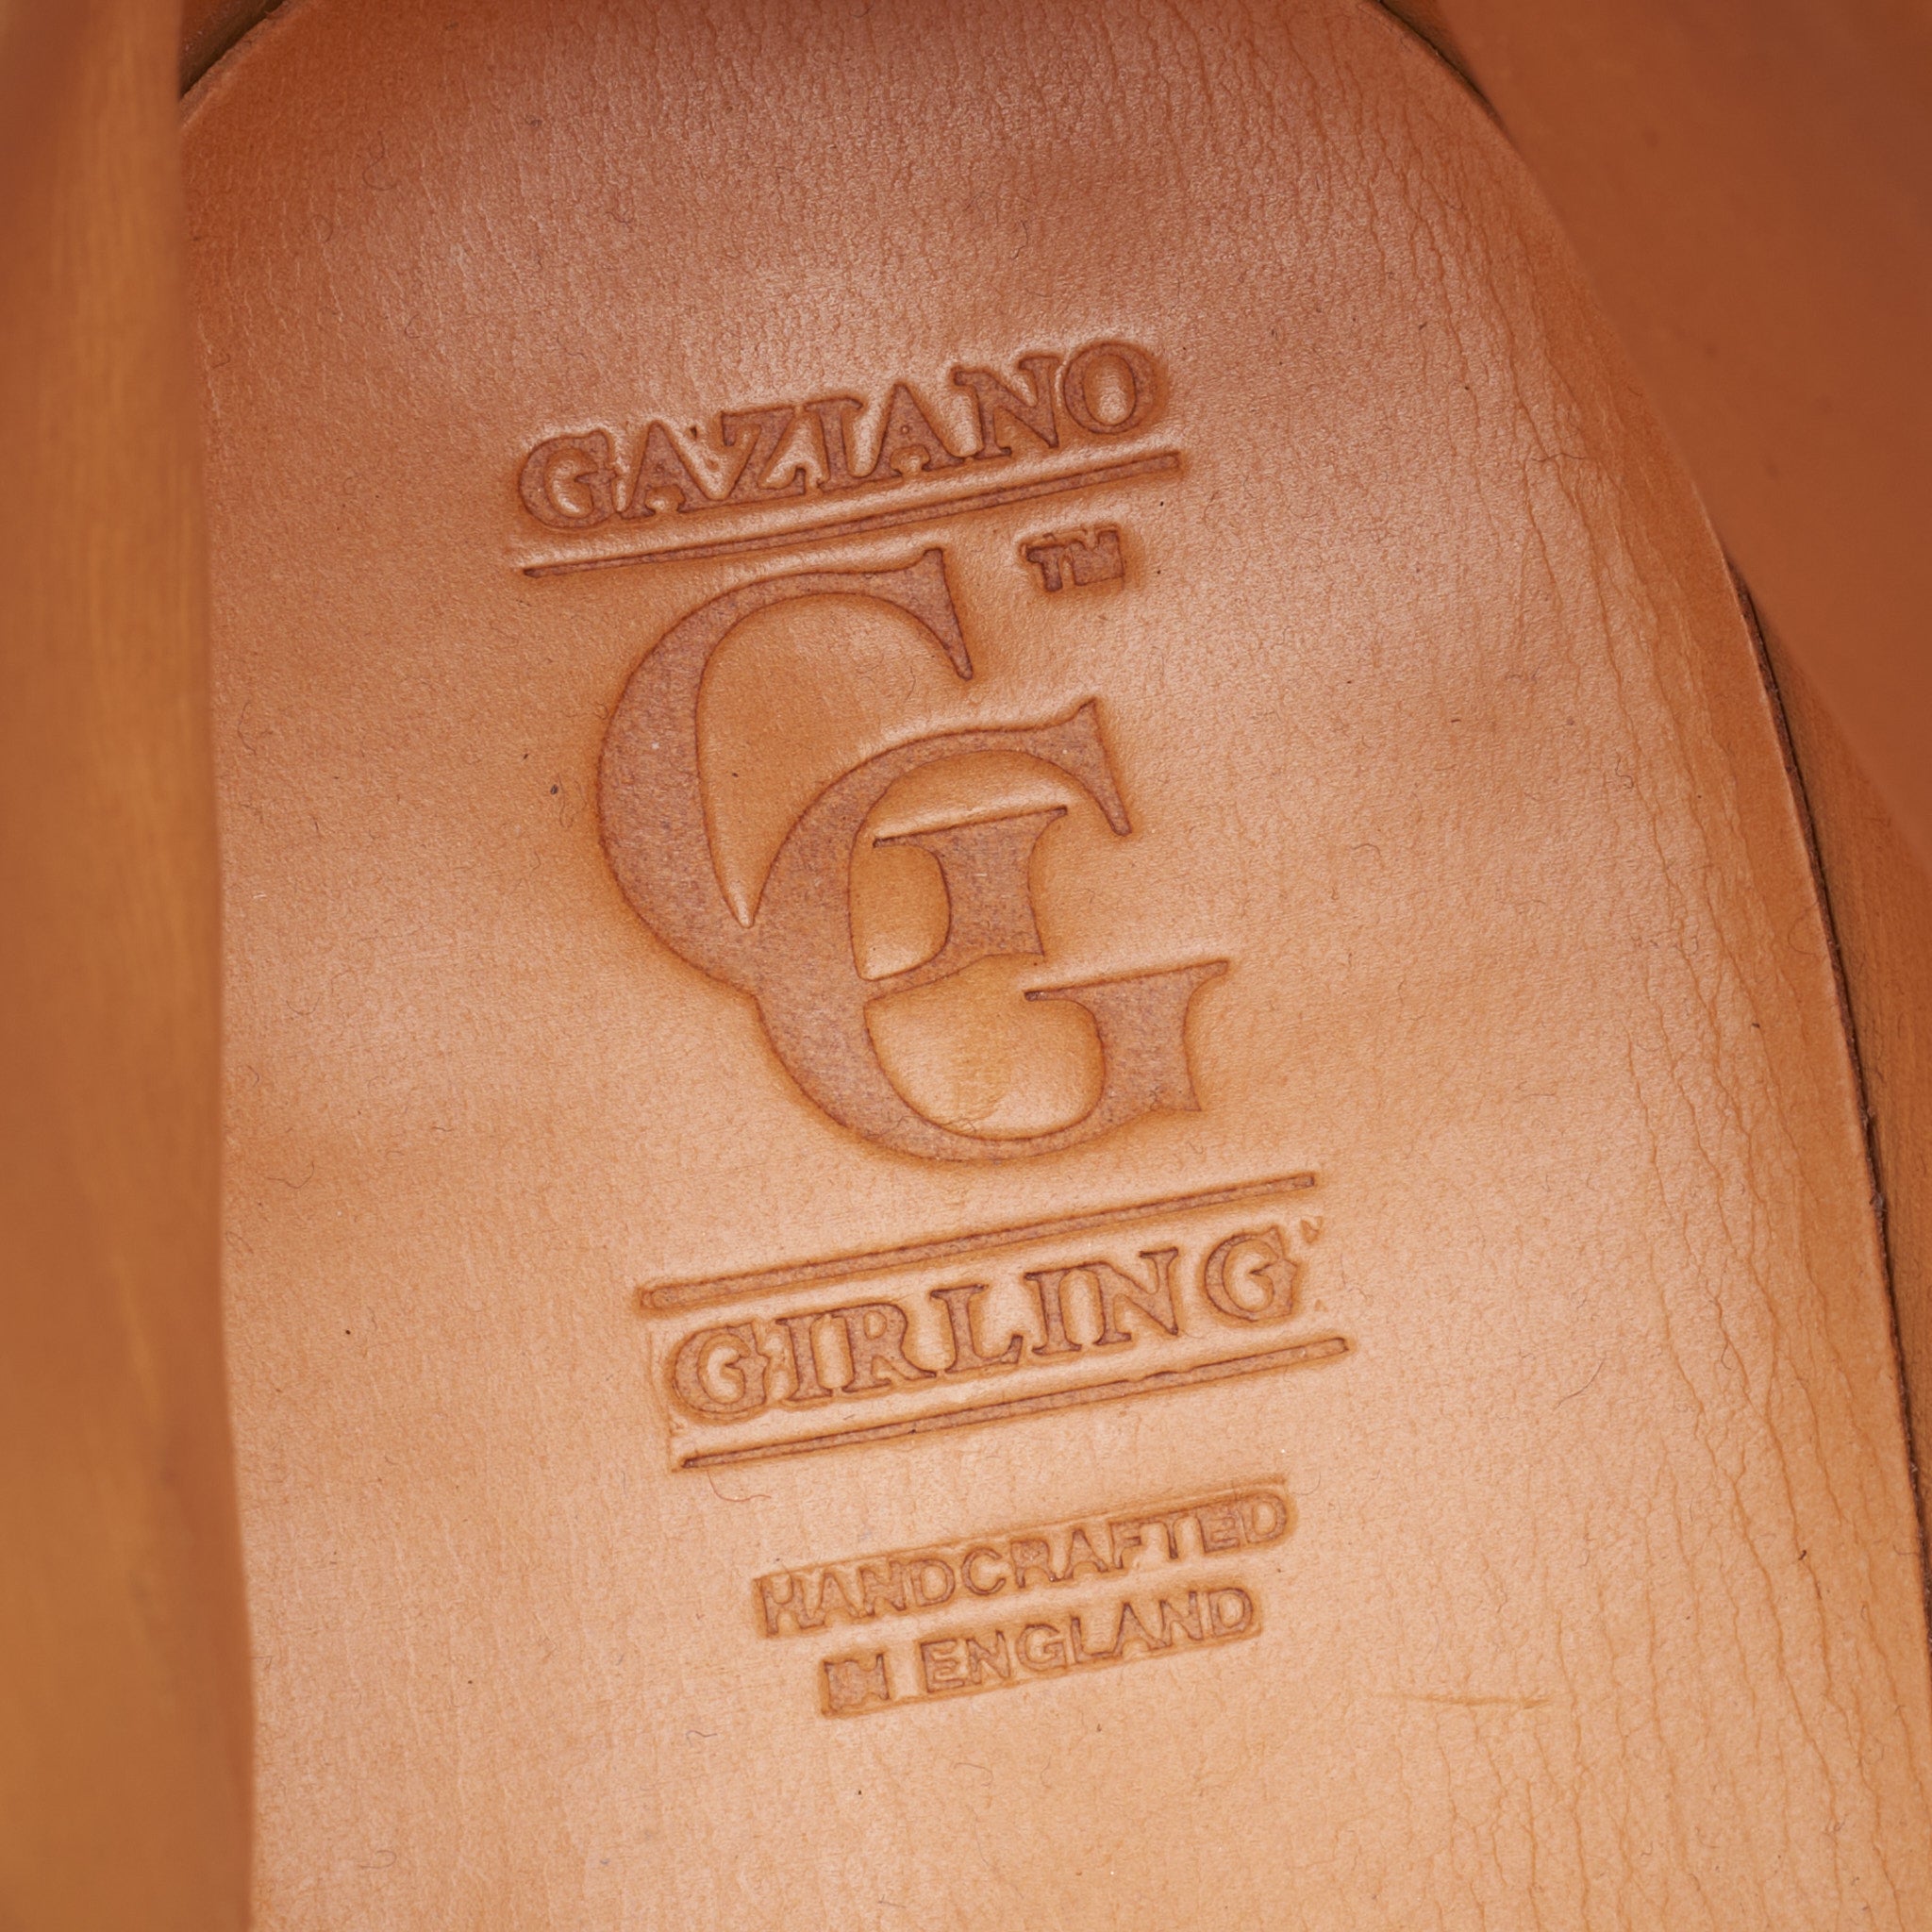 GAZIANO & GIRLING "Cotswold" Black Leather Single Monk Chukka Boots 8E US 8.5 Last MH71 GAZIANO & GIRLING